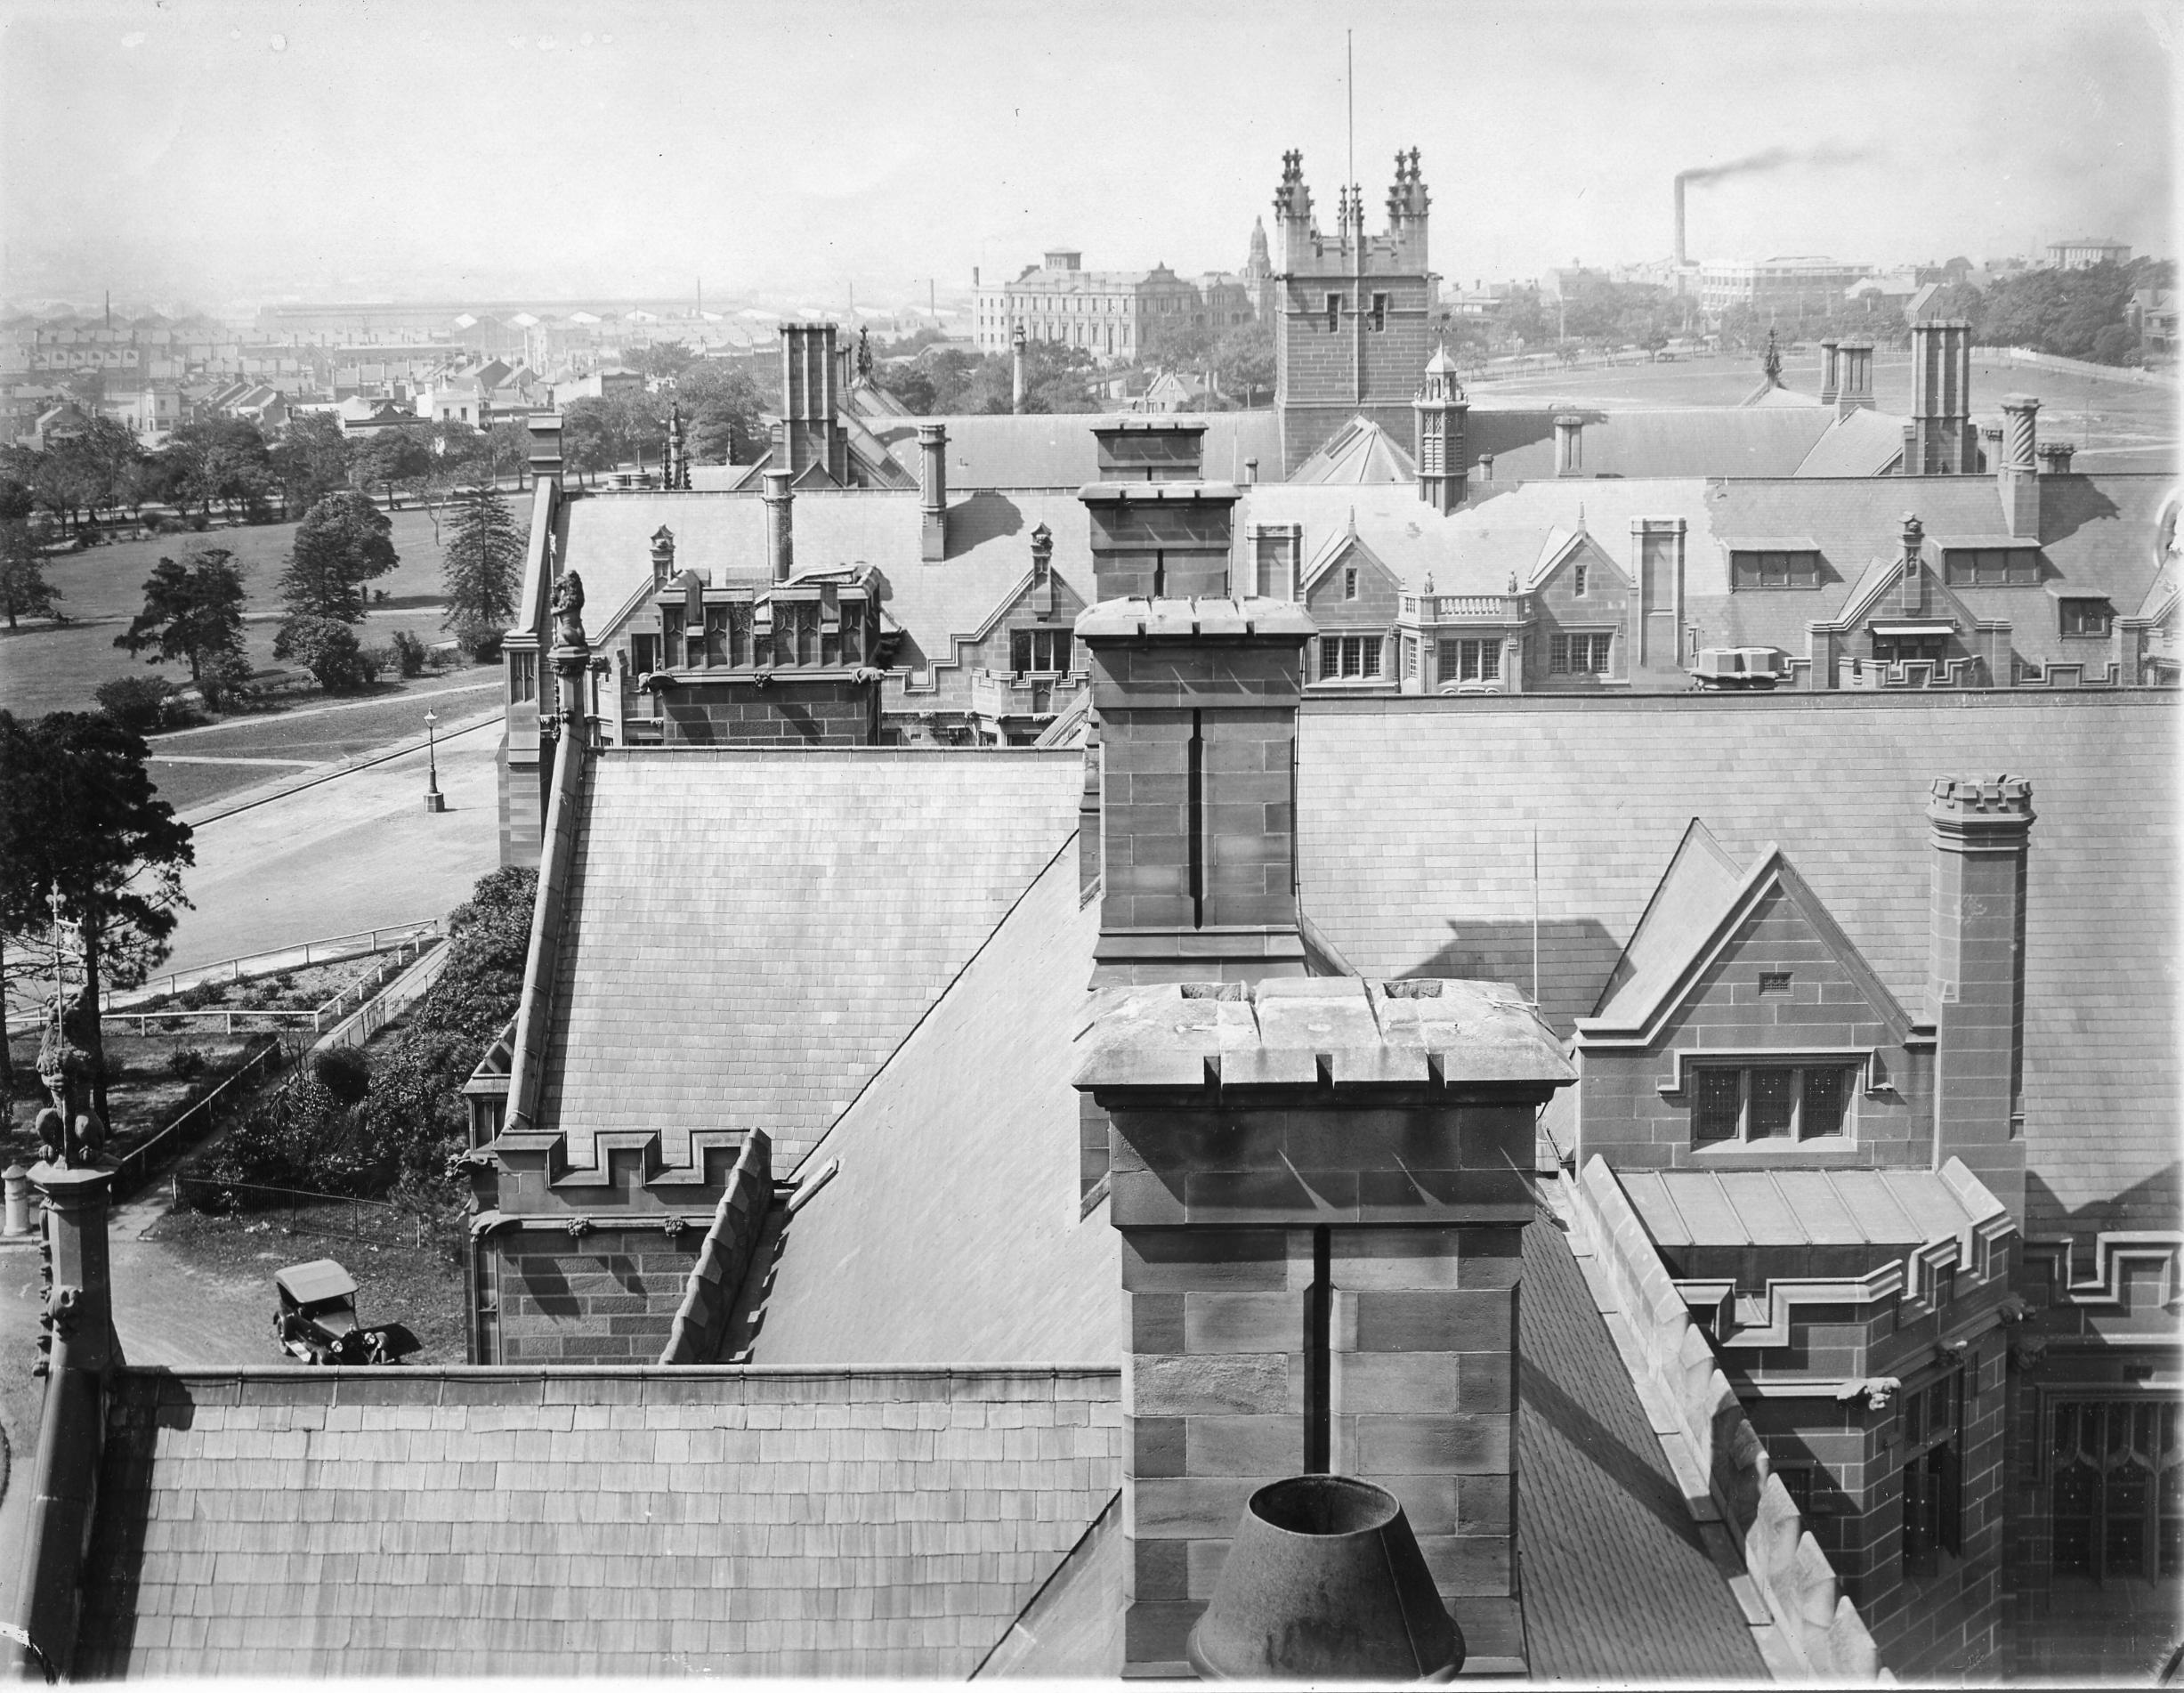 VIEW FROM CLOCK TOWER OVER ROOFS OF MAIN BUILDING AND ANDERSON STUART